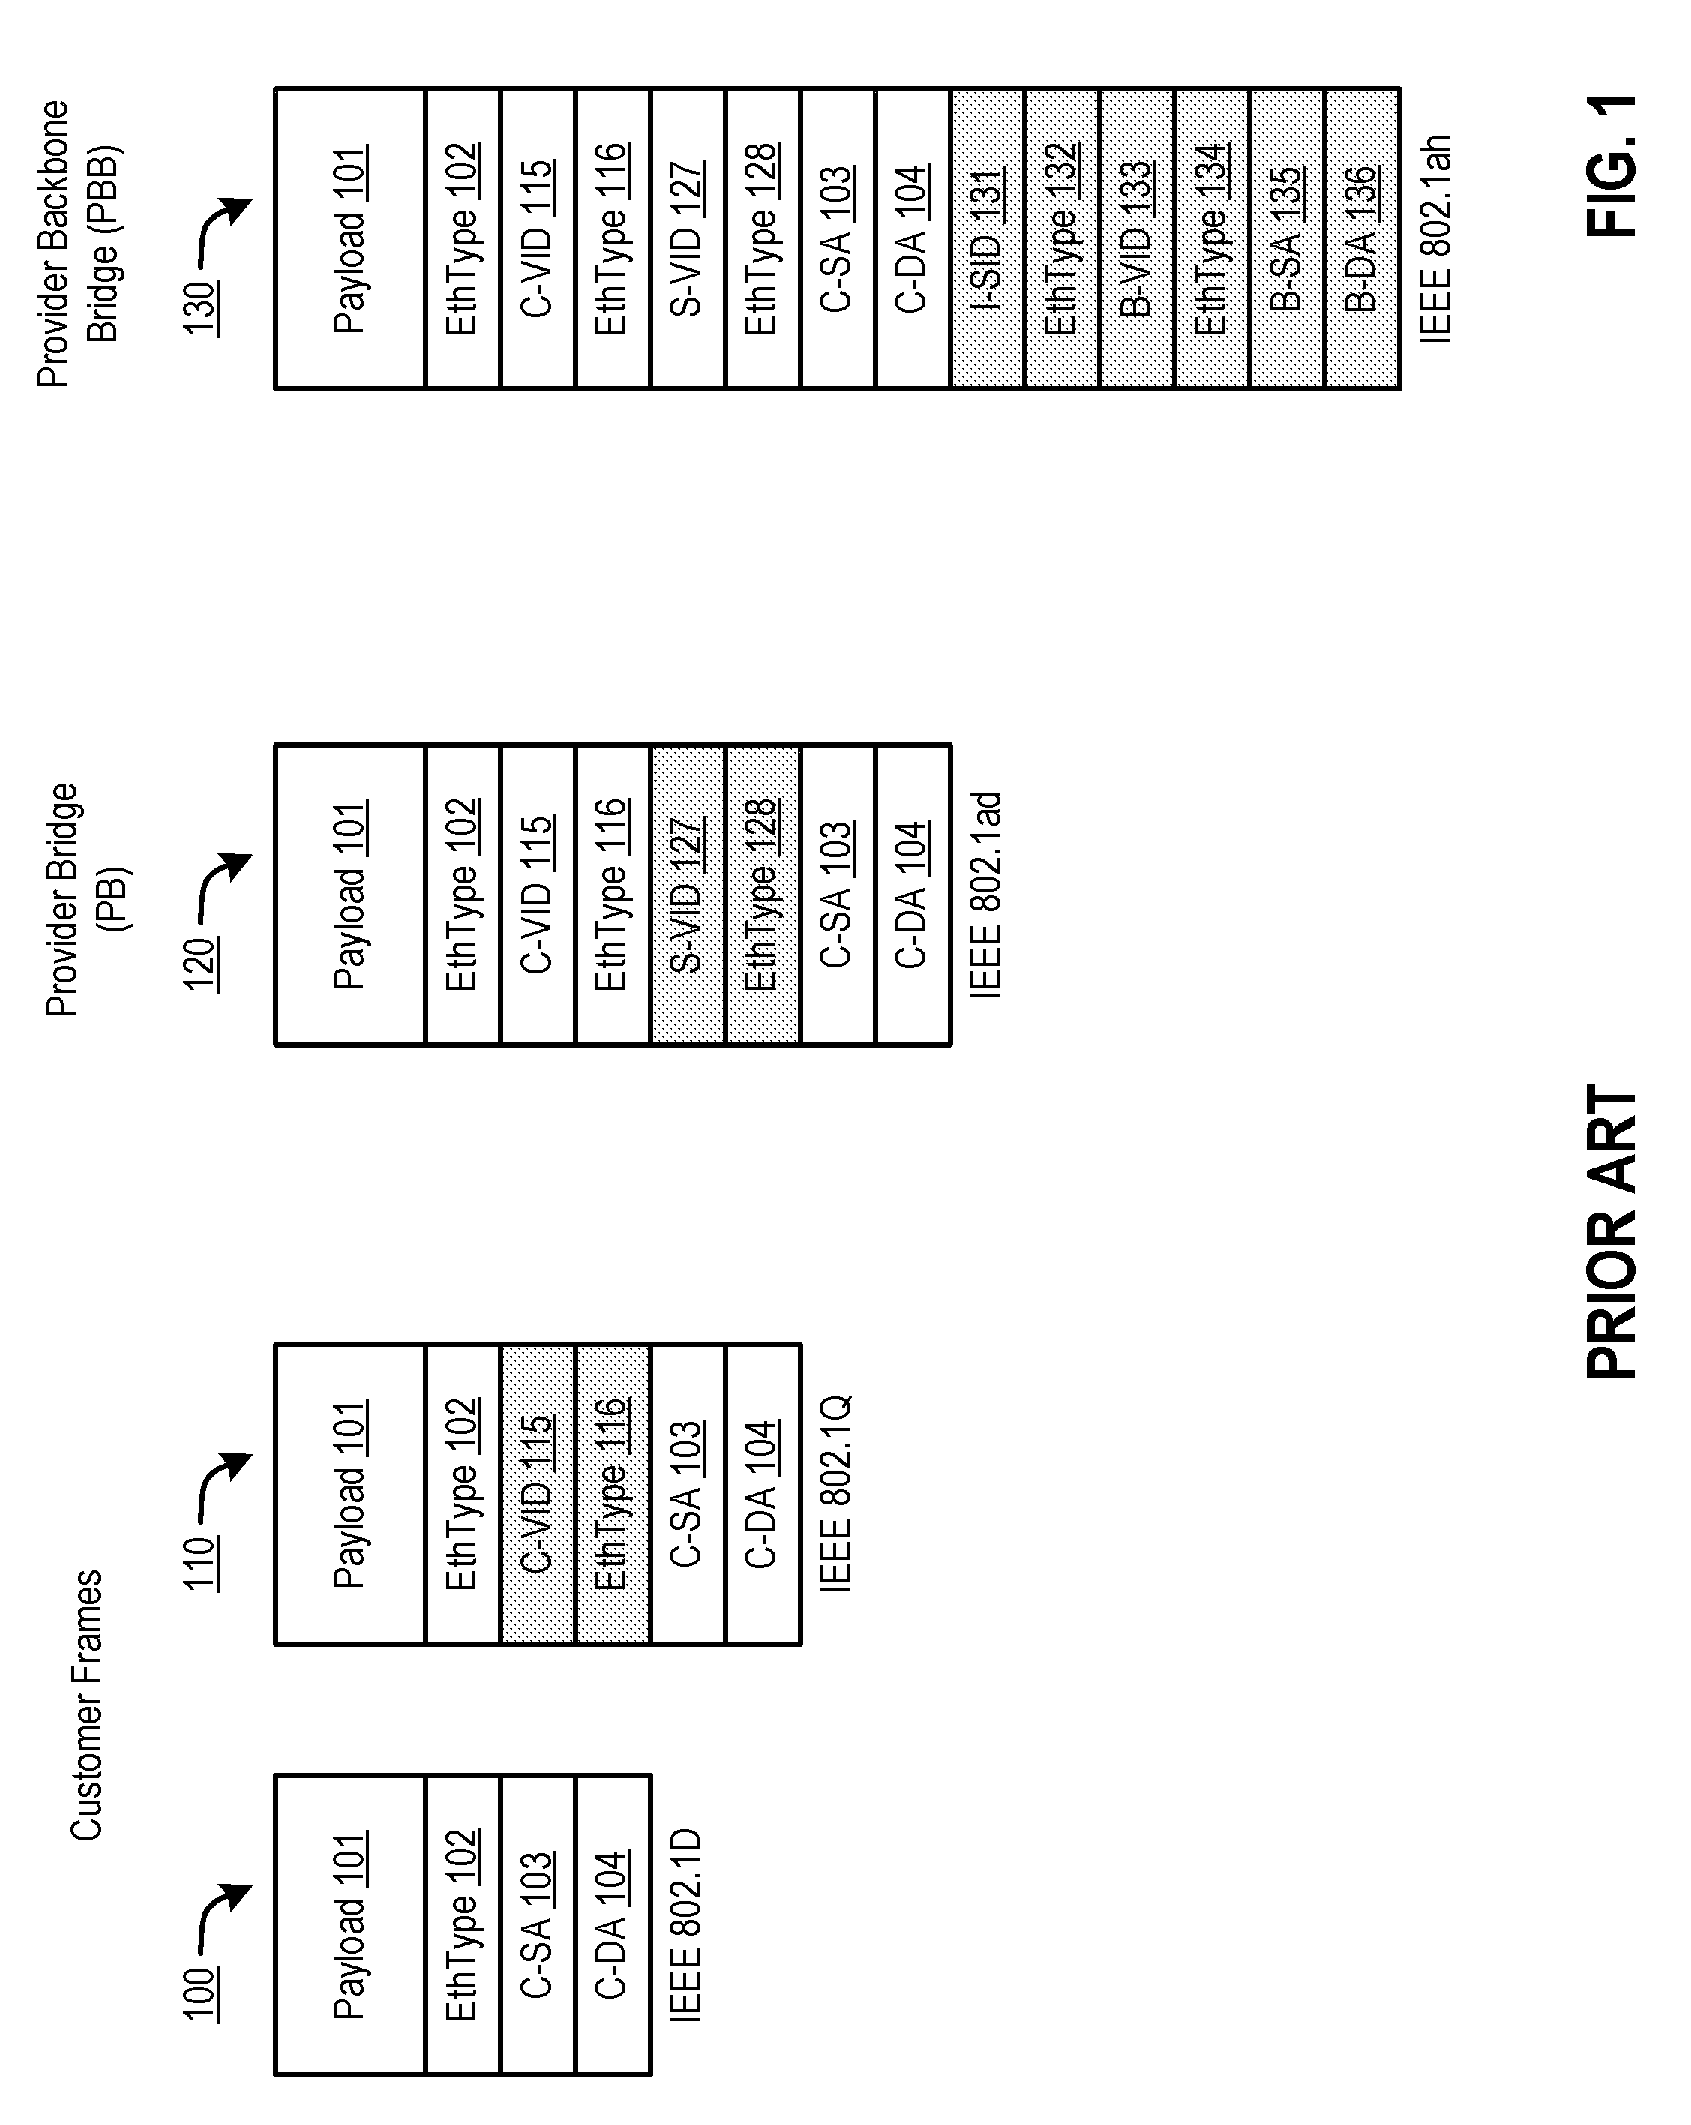 Routing frames in a shortest path computer network for a multi-homed legacy bridge node